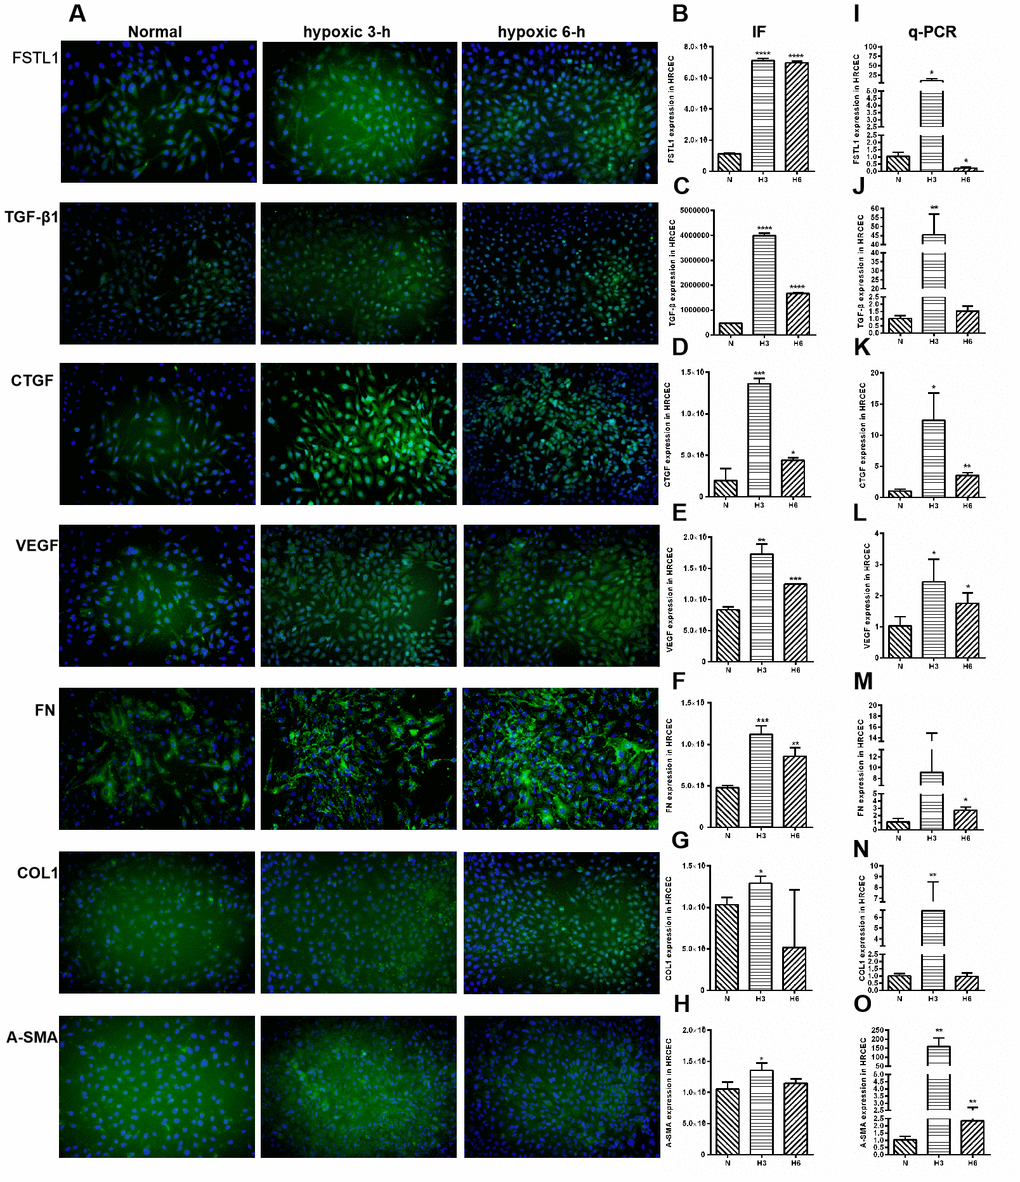 The expression of FSTL1, TGFβ, CTGF, VEGF, FN, COL1 and α-SMA in HRCECs. In Immunofluorescence figures, (A) indicates normal cell fluorescence, hypoxic 3 h cell fluorescence and hypoxic 6 h cell fluorescence (10×). (B–H) indicates the quantitative analysis of immunofluorescence figures in the normal, 3 h hypoxia, and 6 h hypoxia models using ImageJ. The 3 h and 6 h hypoxia results indicated that FSTL1, TGFβ1, CTGF, VEGF, FN, COL1, and α-SMA were expressed at significantly higher levels than in normal cells. (I–O) indicates that the mRNA expression of FSTL1 and ECM-related factors in the three models. The expression of FSTL1, TGFβ1, CTGF, VEGF, FN, COL1, and α-SMA mRNA in 3 h and 6 h hypoxia conditions, respectively, were expressed at significantly higher levels than in normal cells (N: normal, h3: 3 h hypoxia, h6: 6 h hypoxia). Data are expressed as mean ± SEM. * means P 